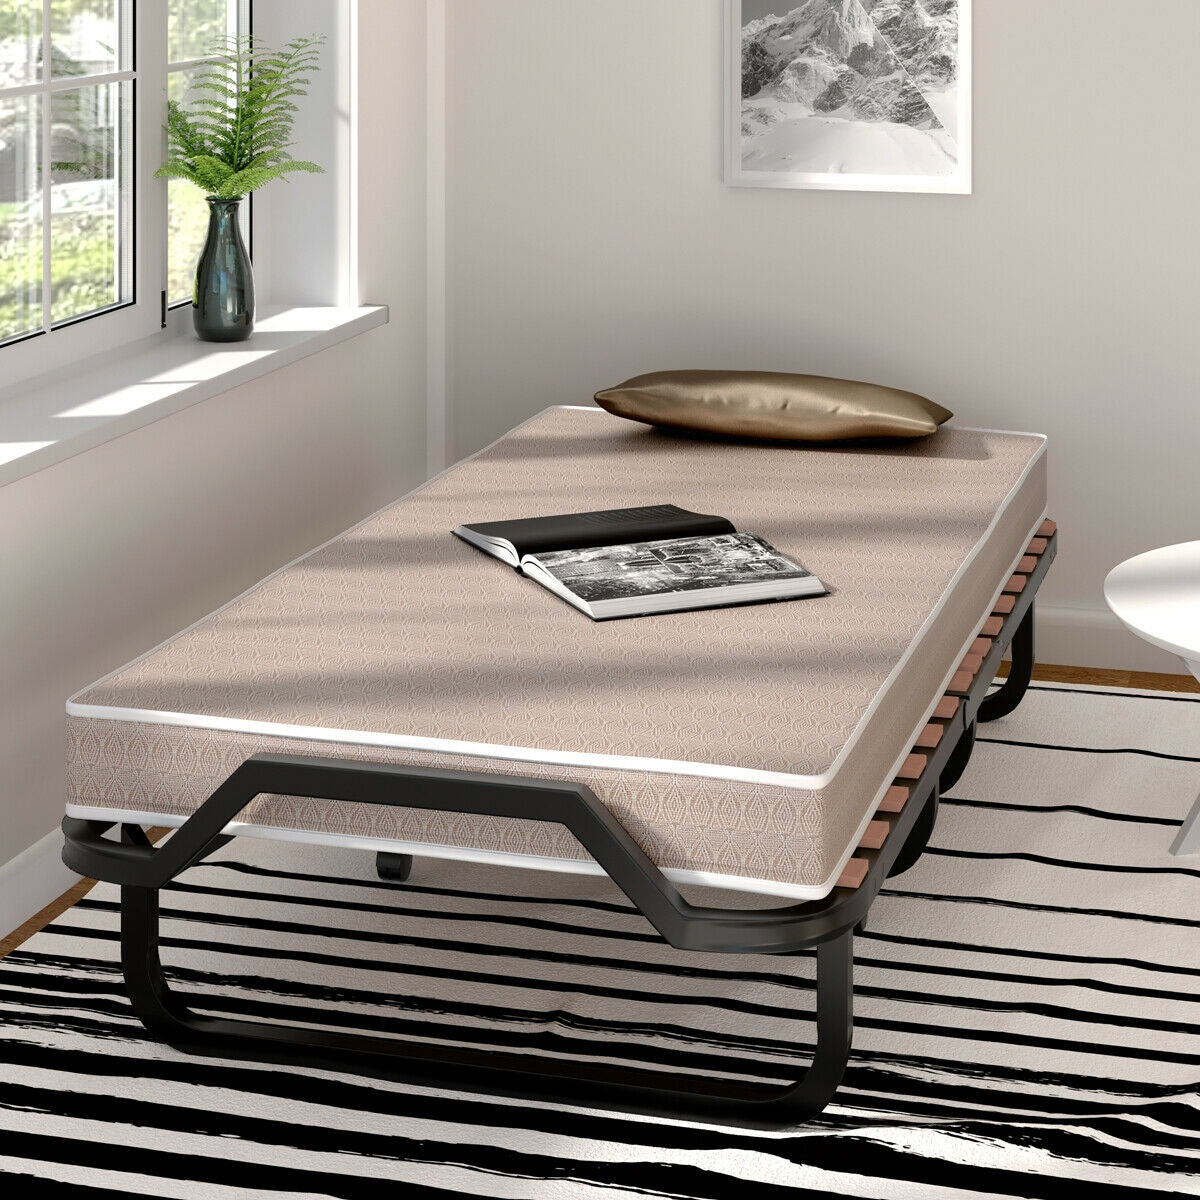 Rollaway Folding Bed with Memory Foam Mattress Made in Italy